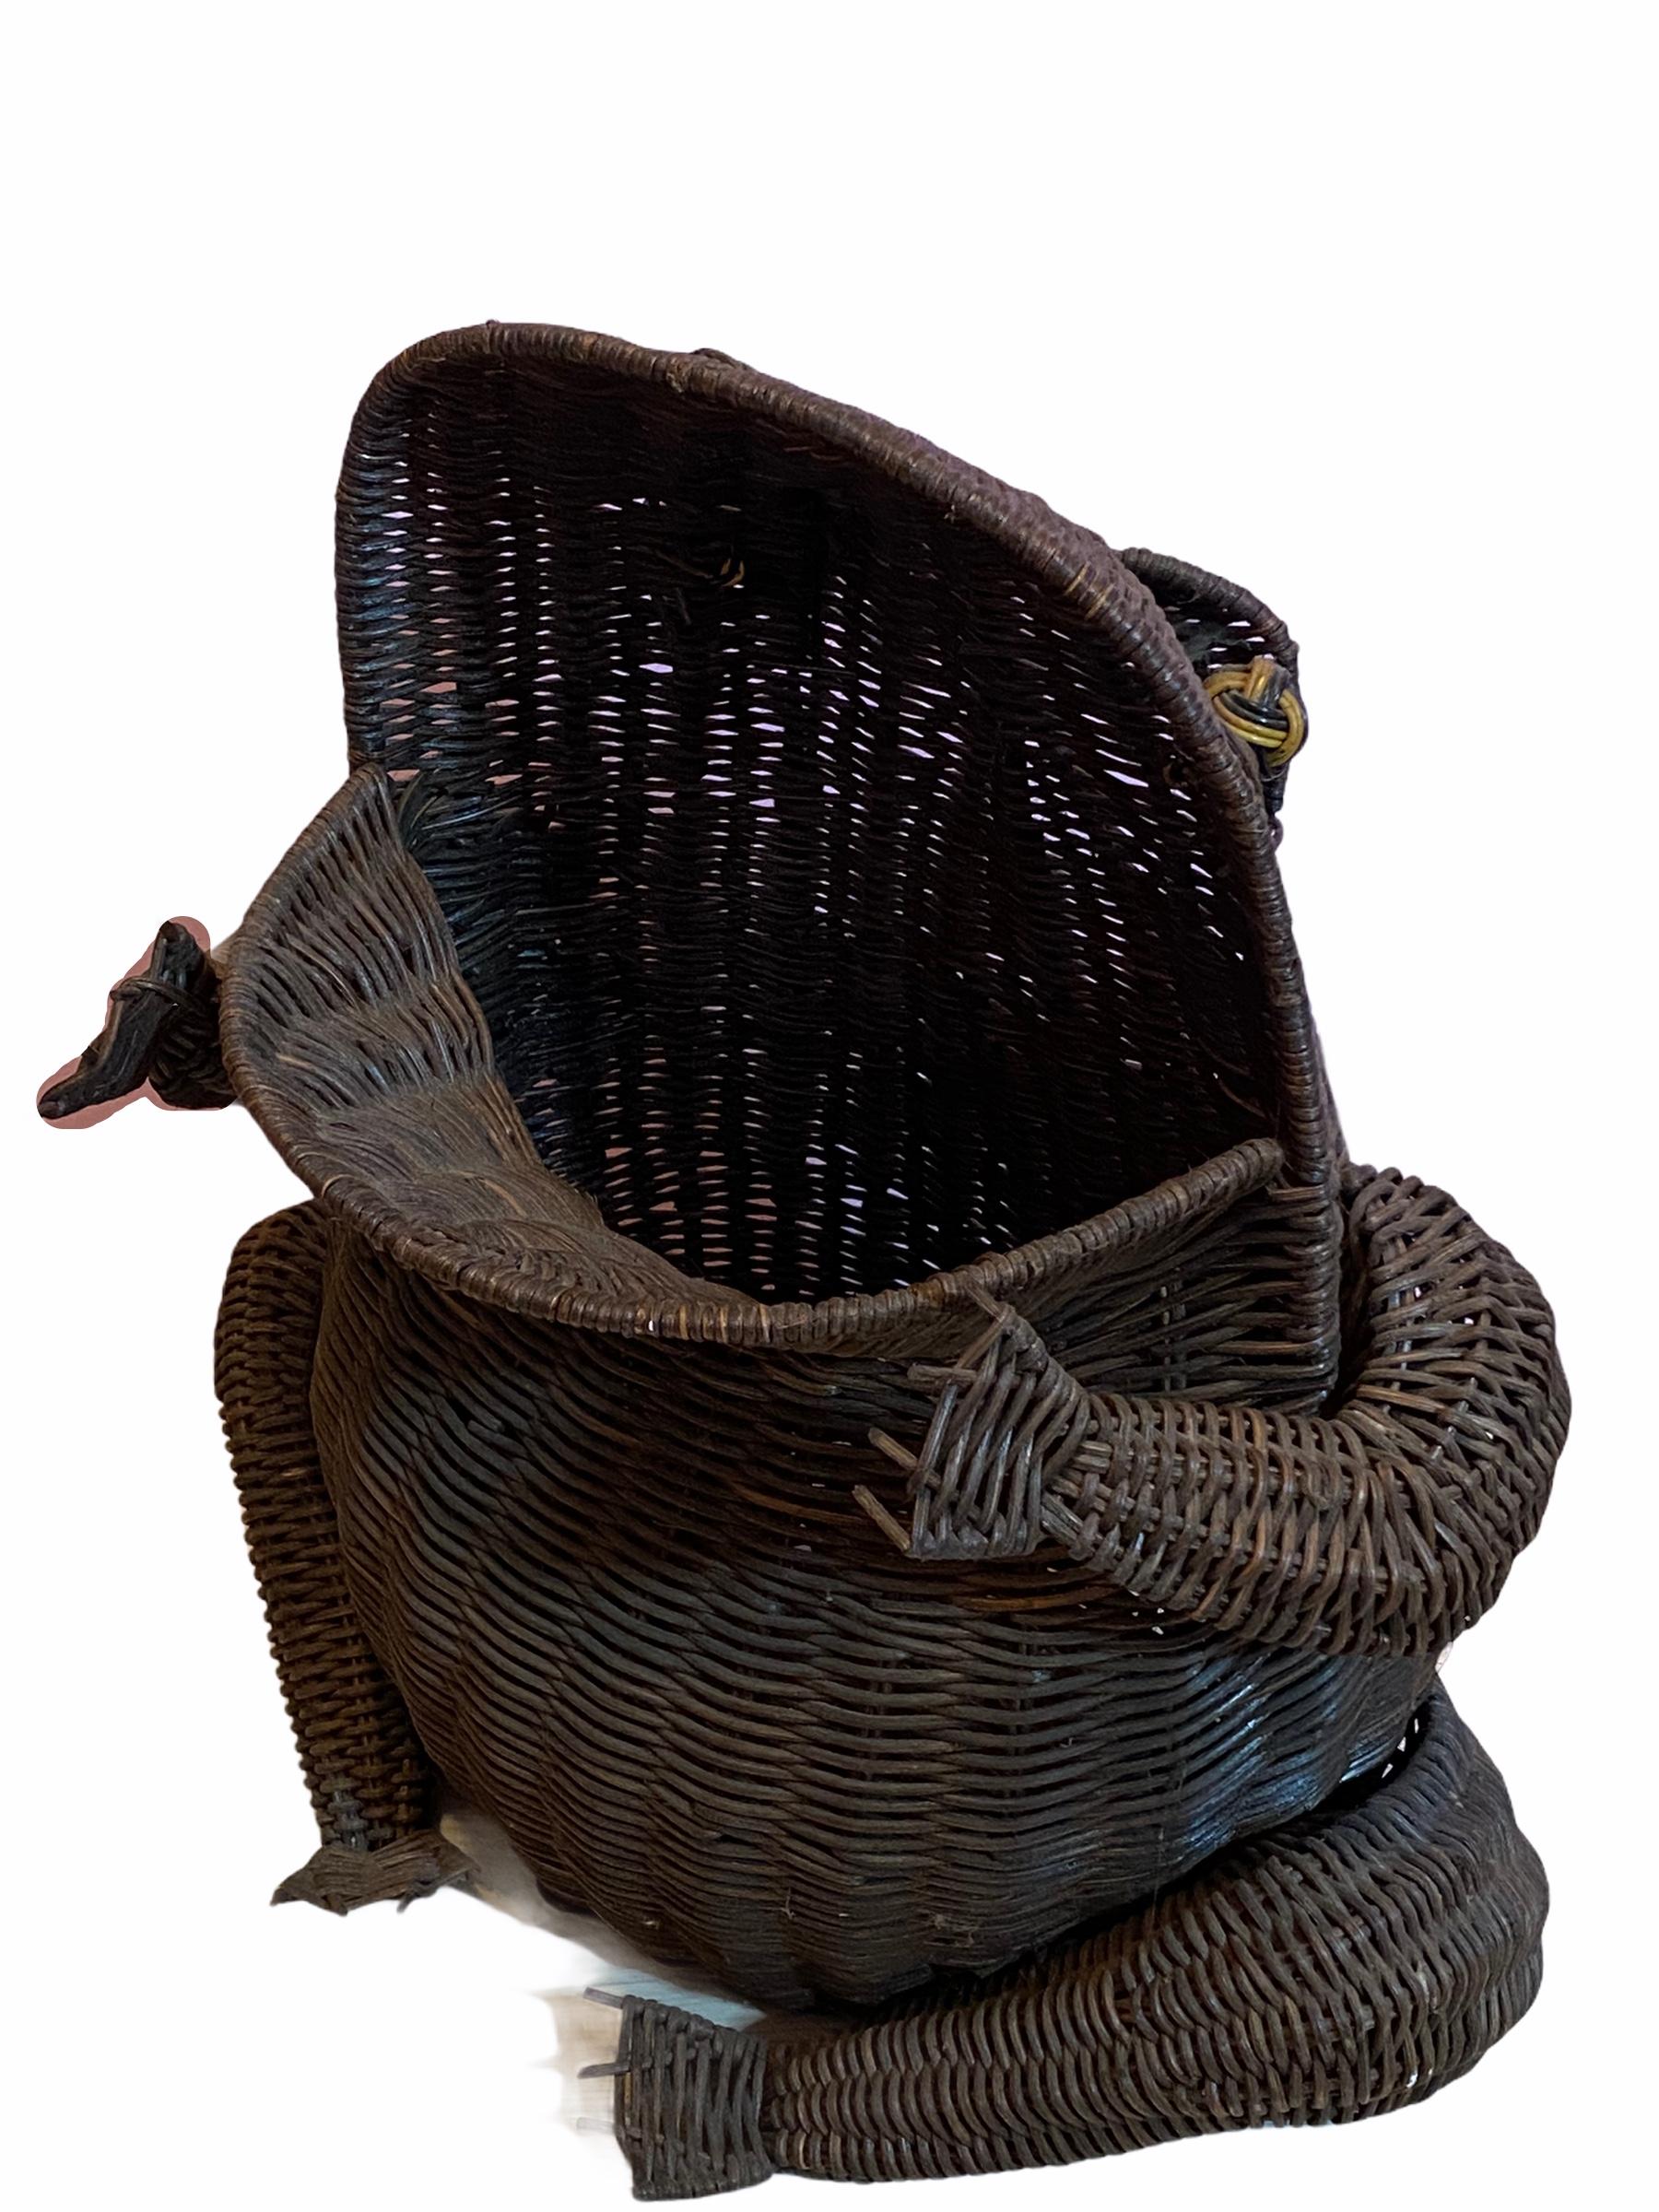 Late 20th Century Mid-Century Modern Frog Wicker Magazine Rack Stand, 1970s, German For Sale